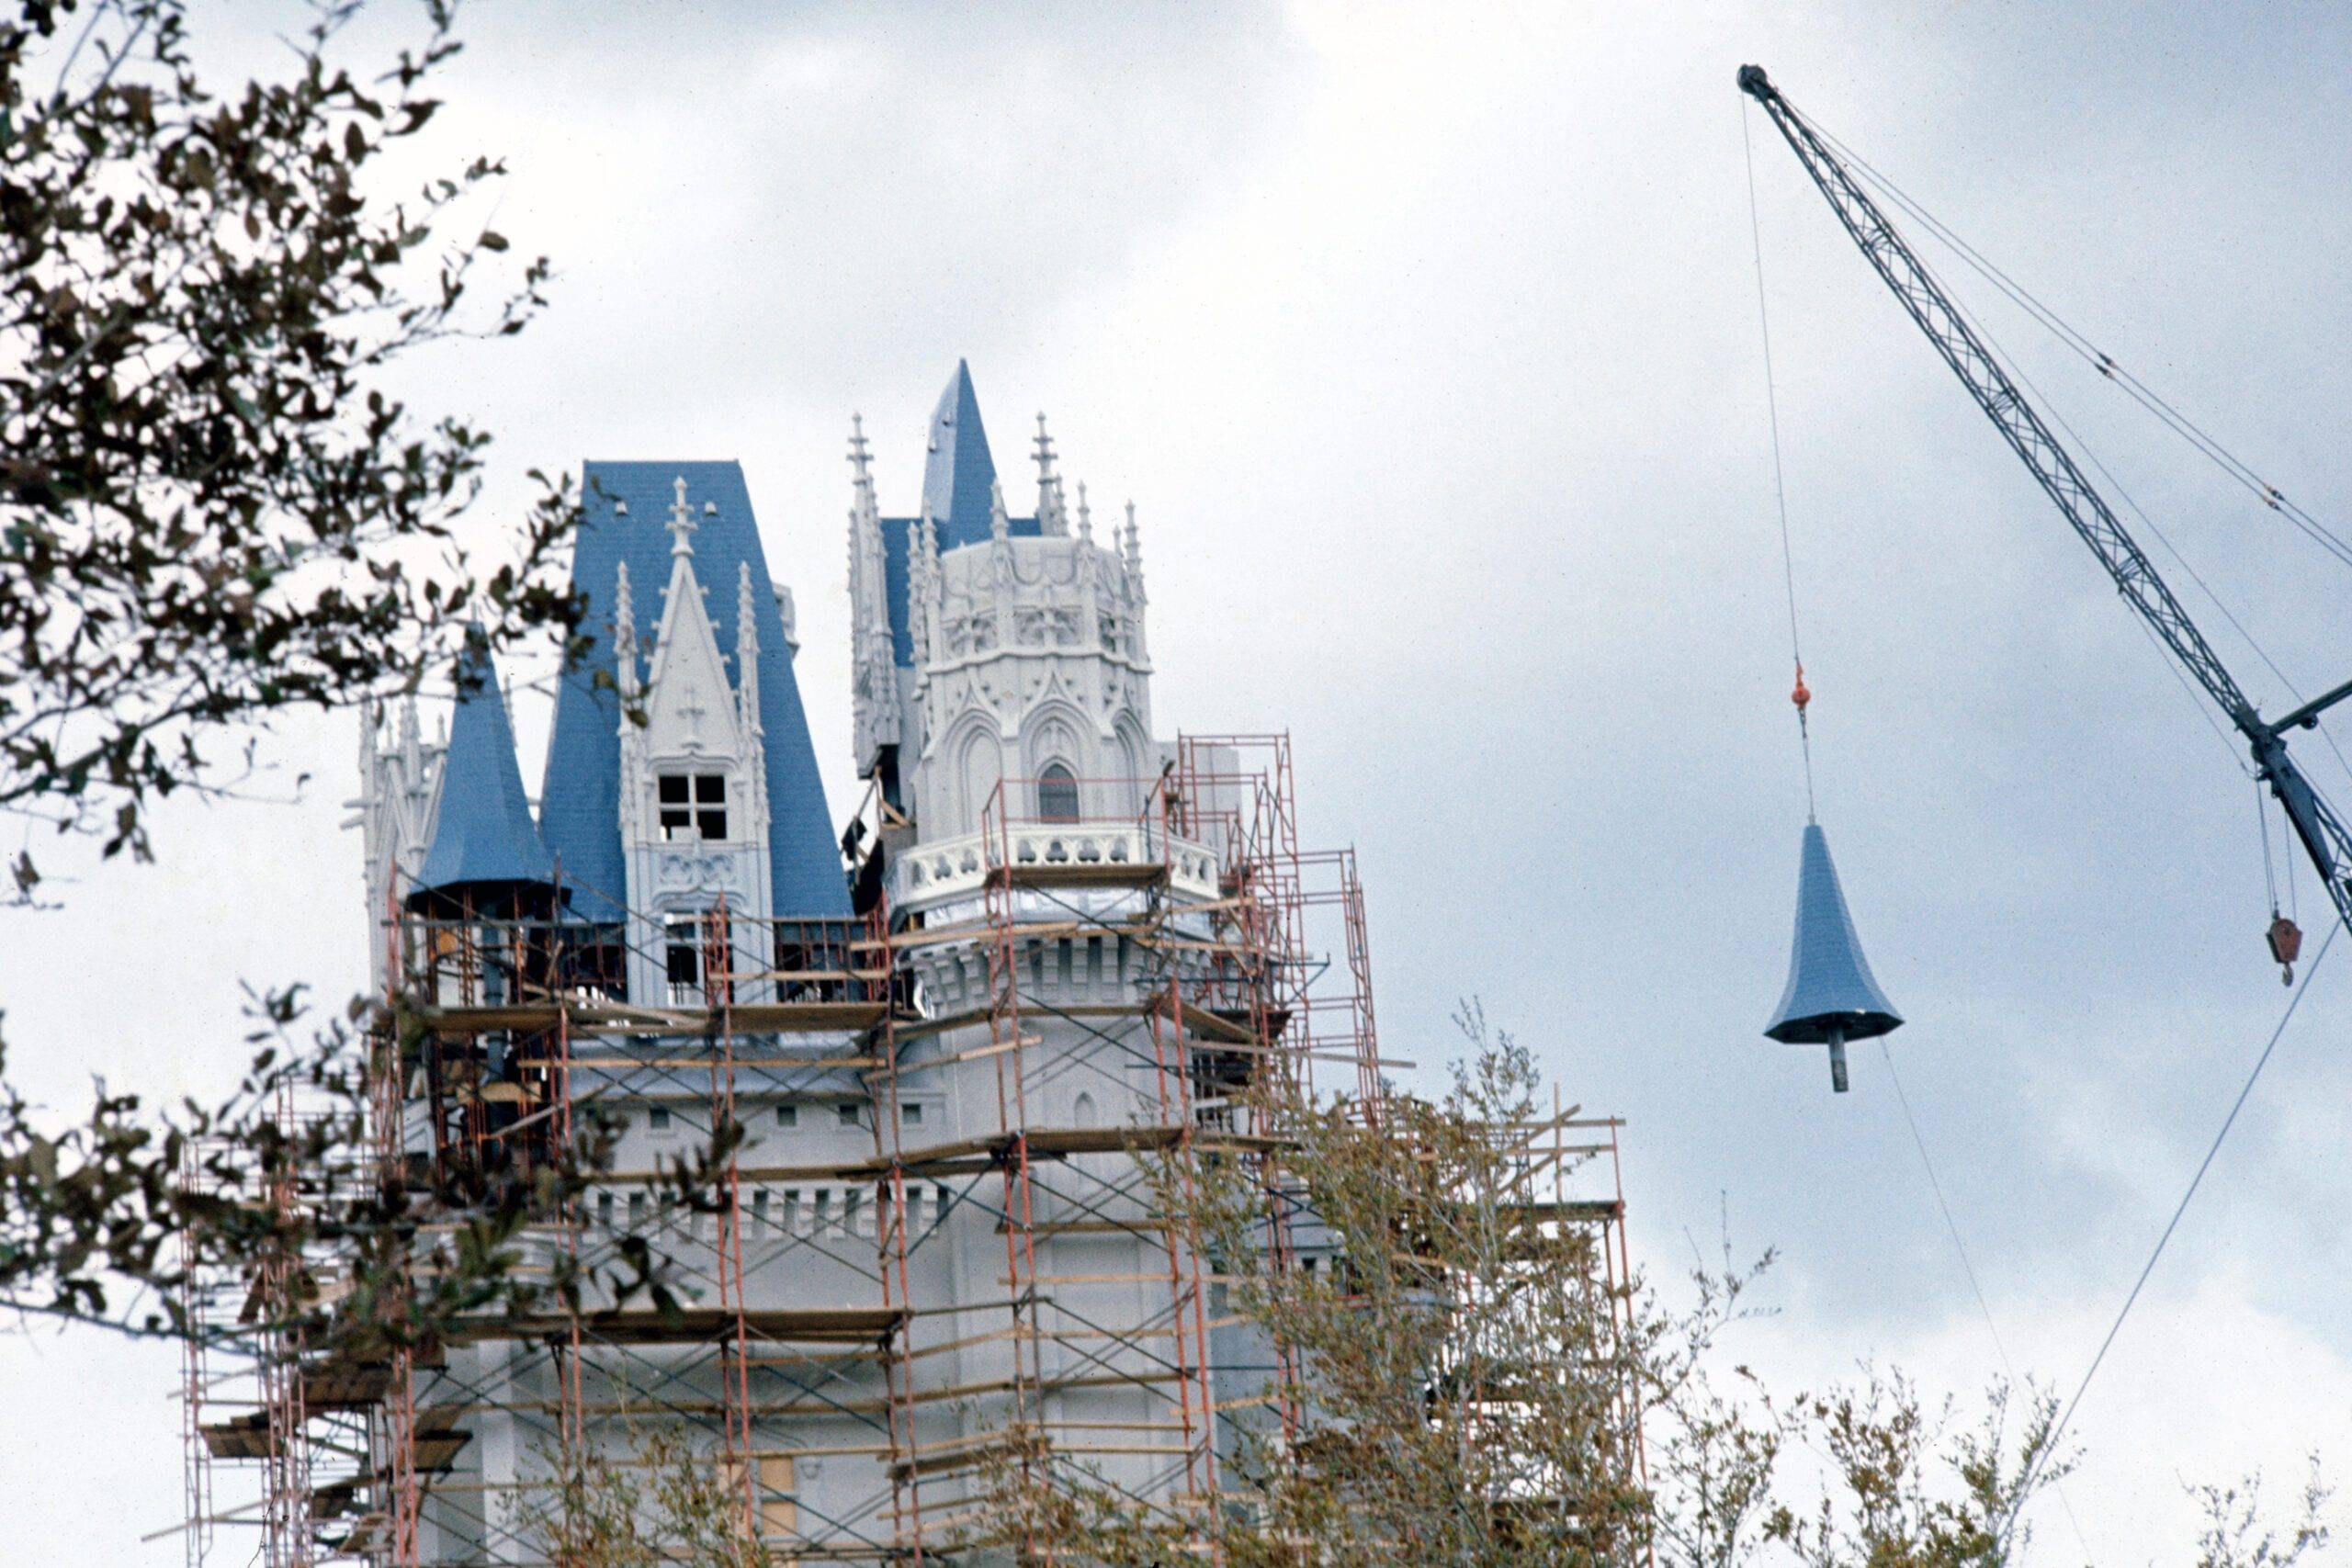 Download Five Decades Of Magic At Walt Disney World A Look At Some Rare Construction Photos From 1971 1979